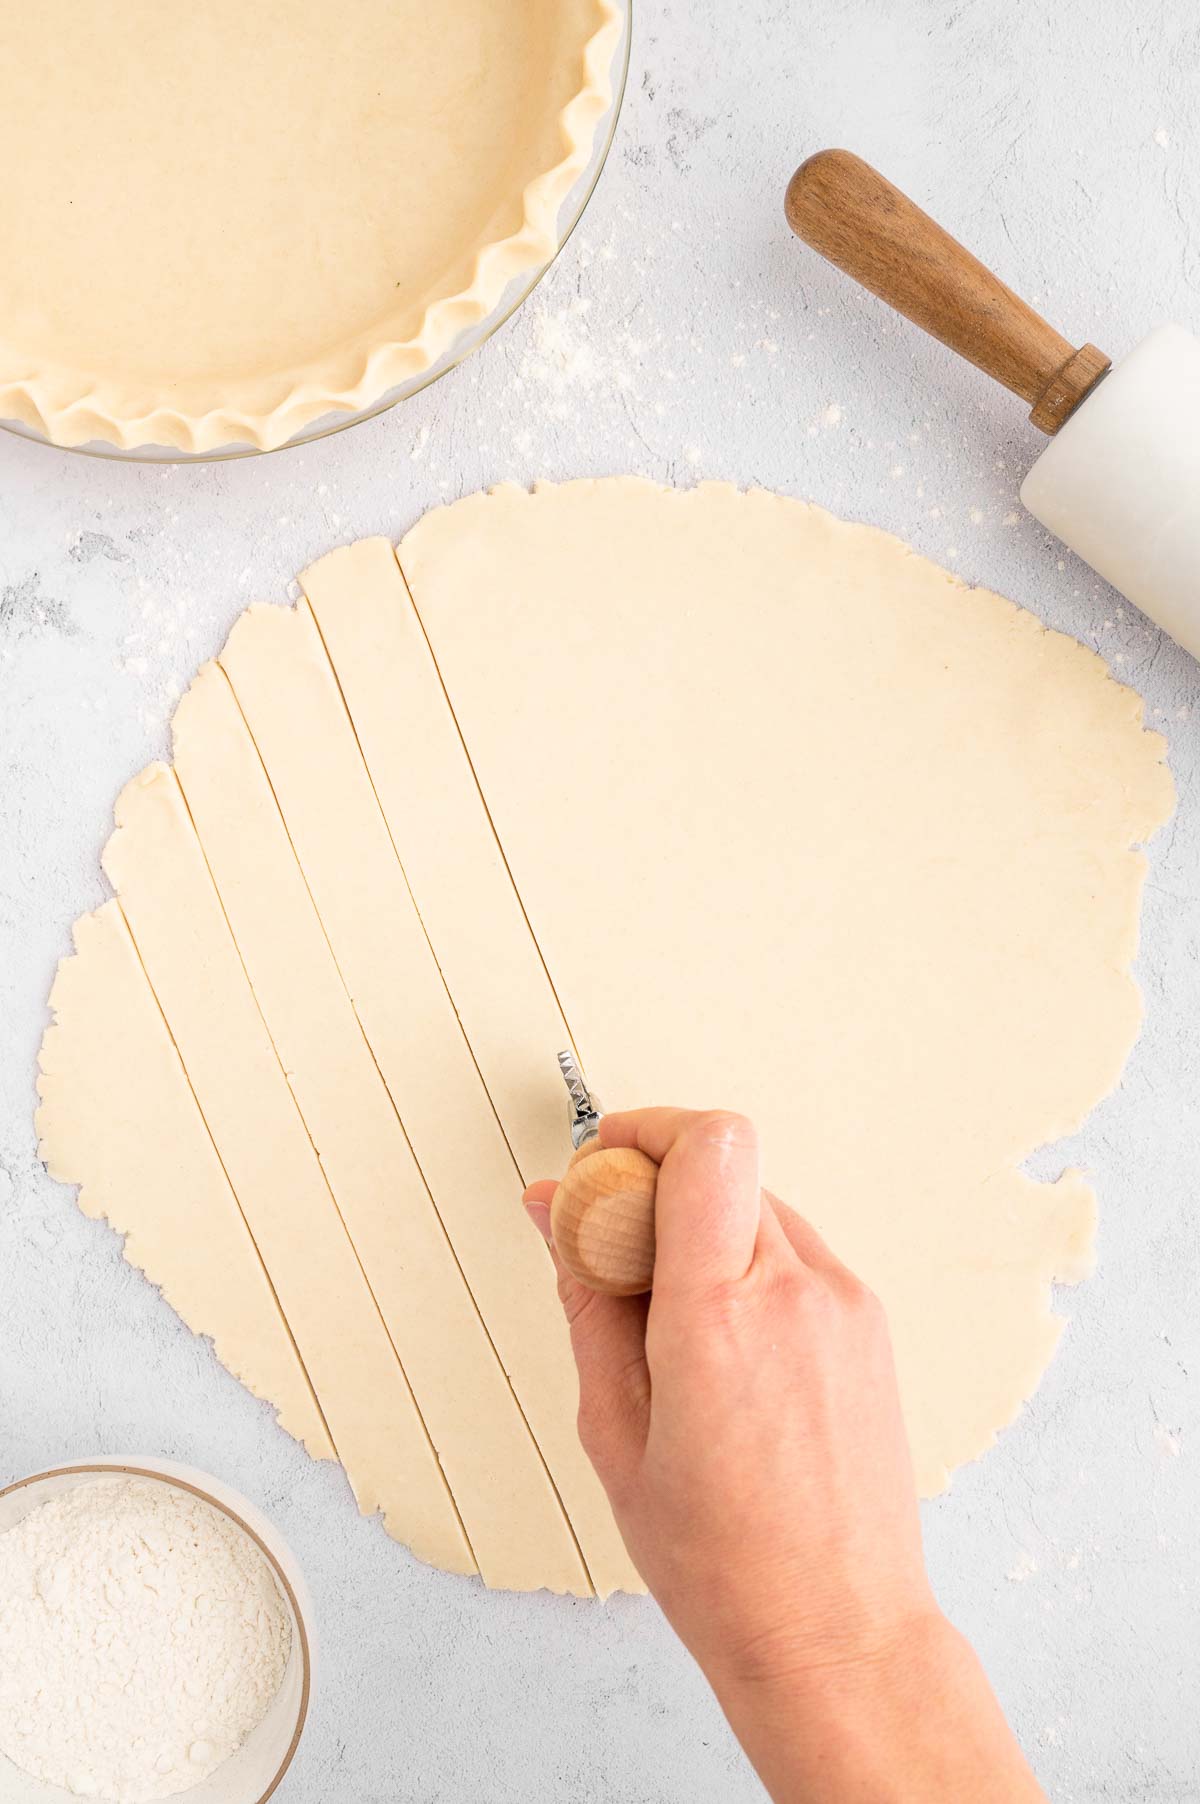 A hand using a pastry wheel on the pie crust dough to cut it into even strips.